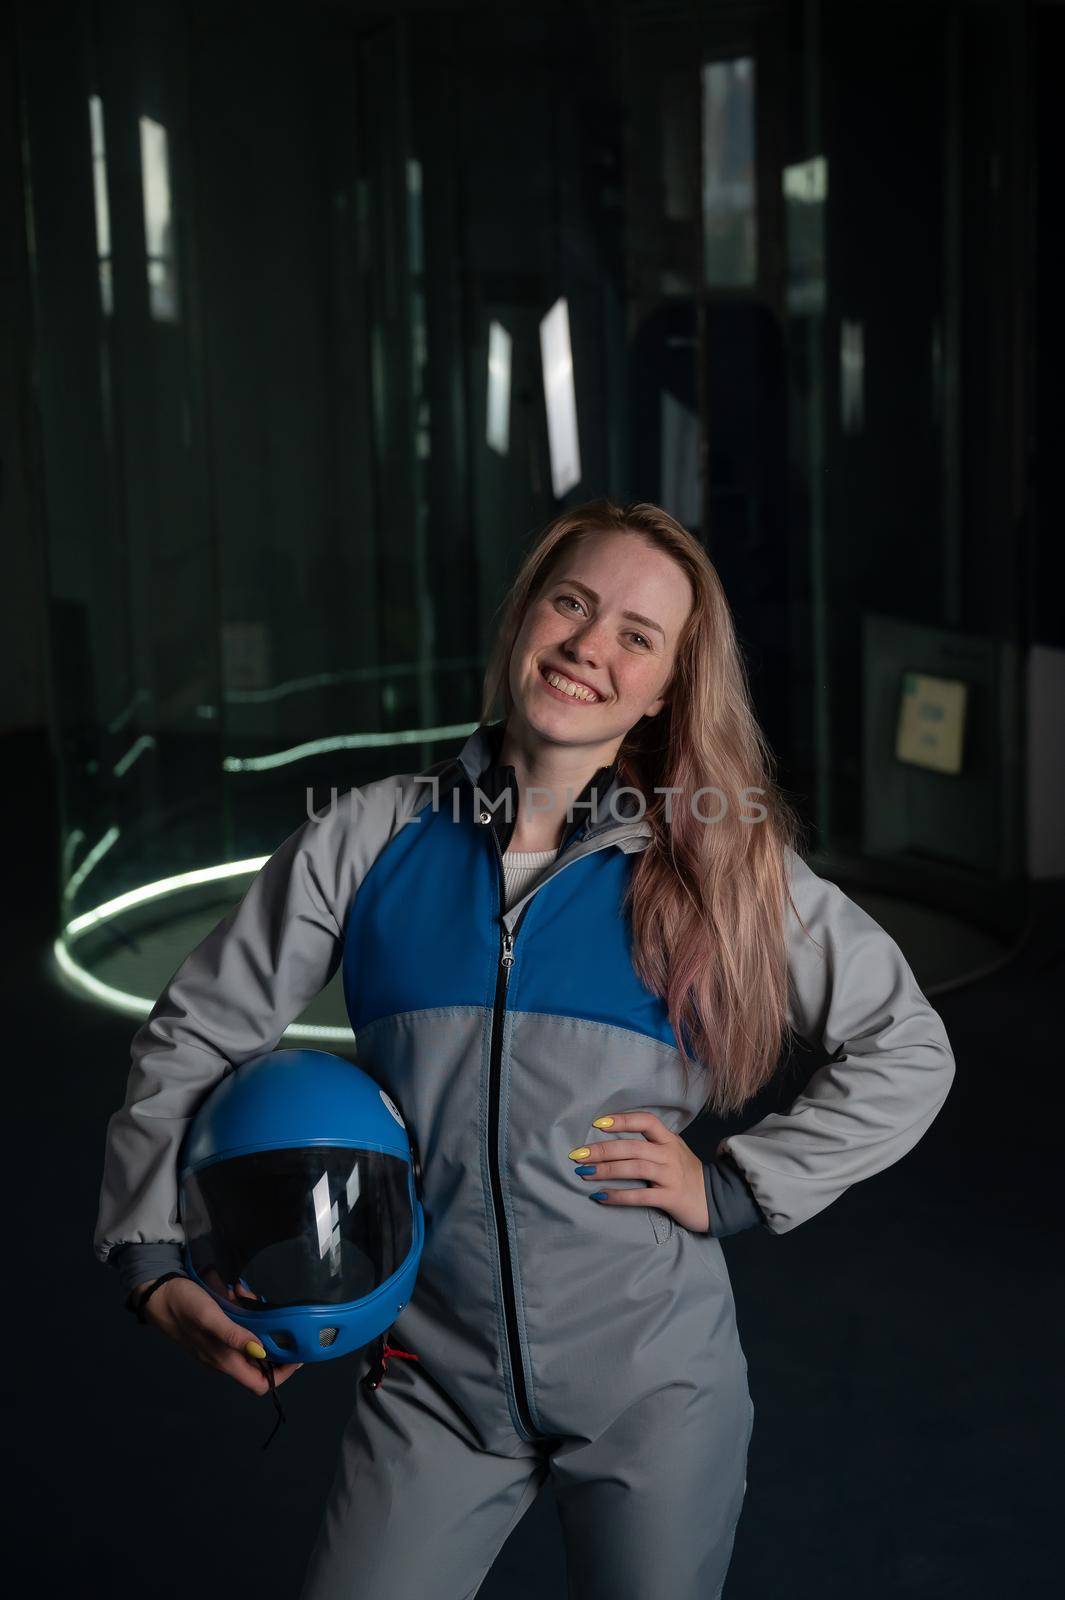 Caucasian woman puts on a helmet before flying in a wind tunnel. Free fall simulator. by mrwed54